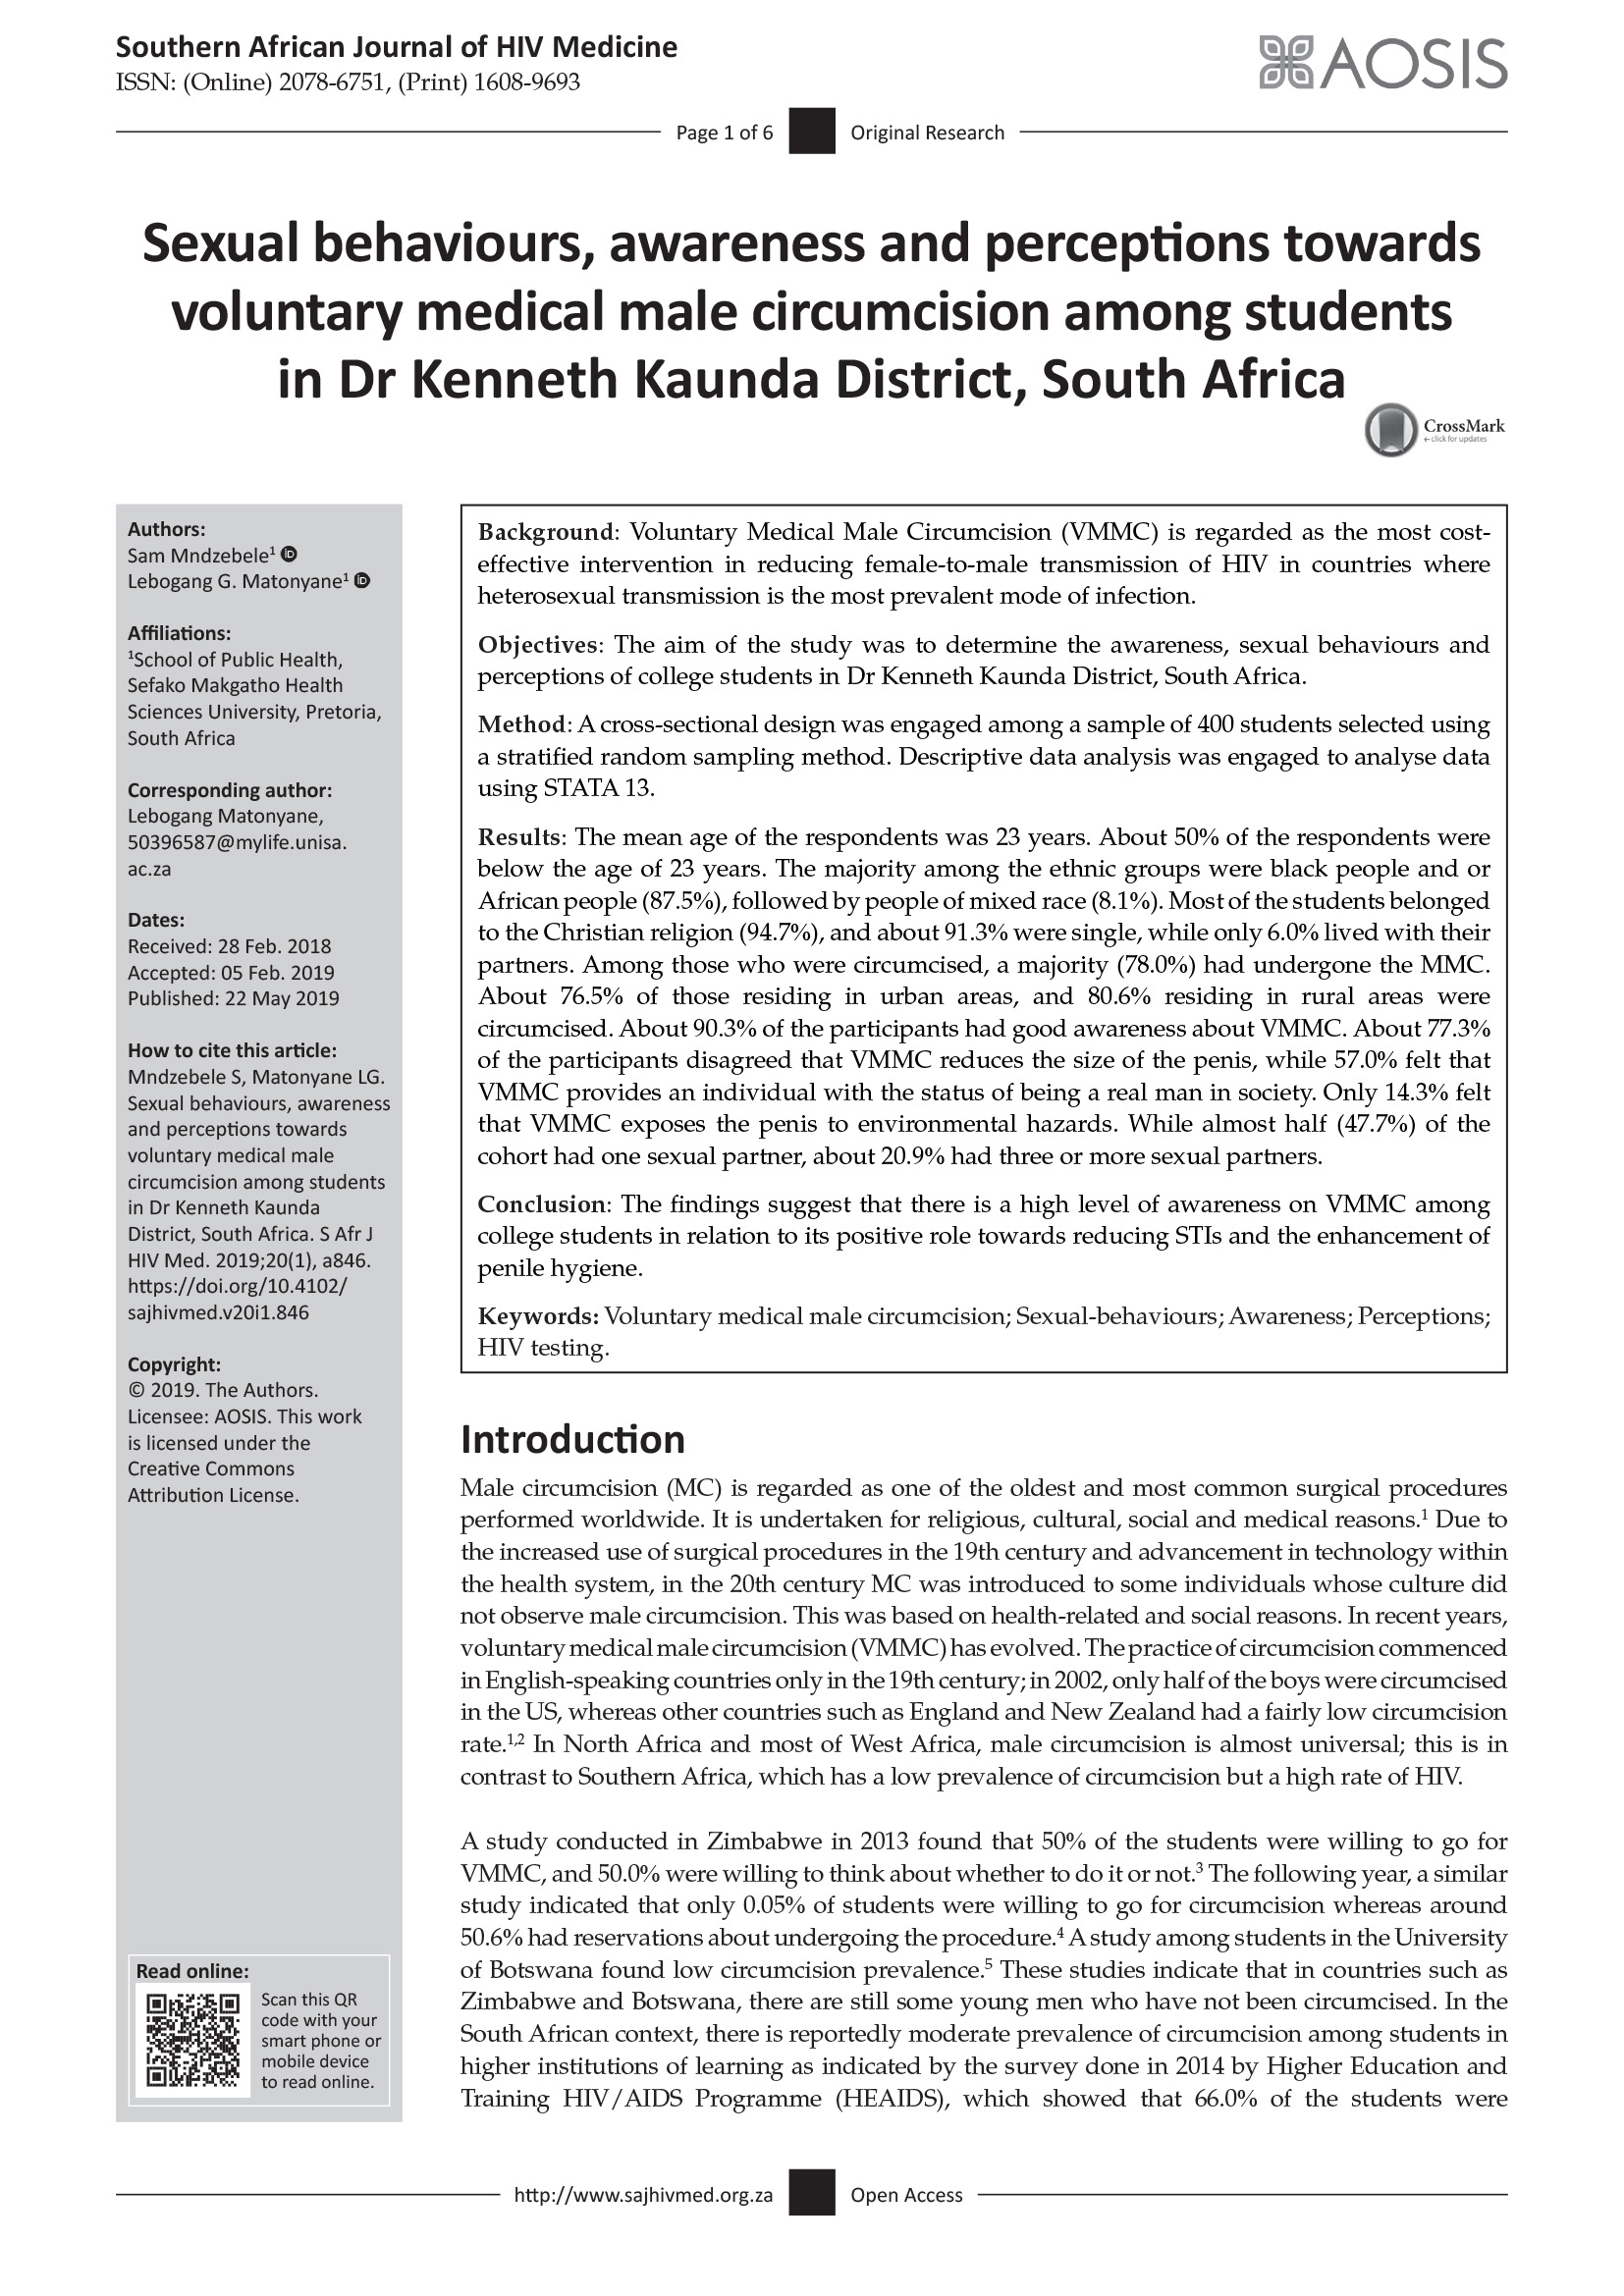 Sexual Behaviours, Awareness and Perceptions Towards Voluntary Medical Male Circumcision Among Students in Dr Kenneth Kaunda District, South Africa - cover